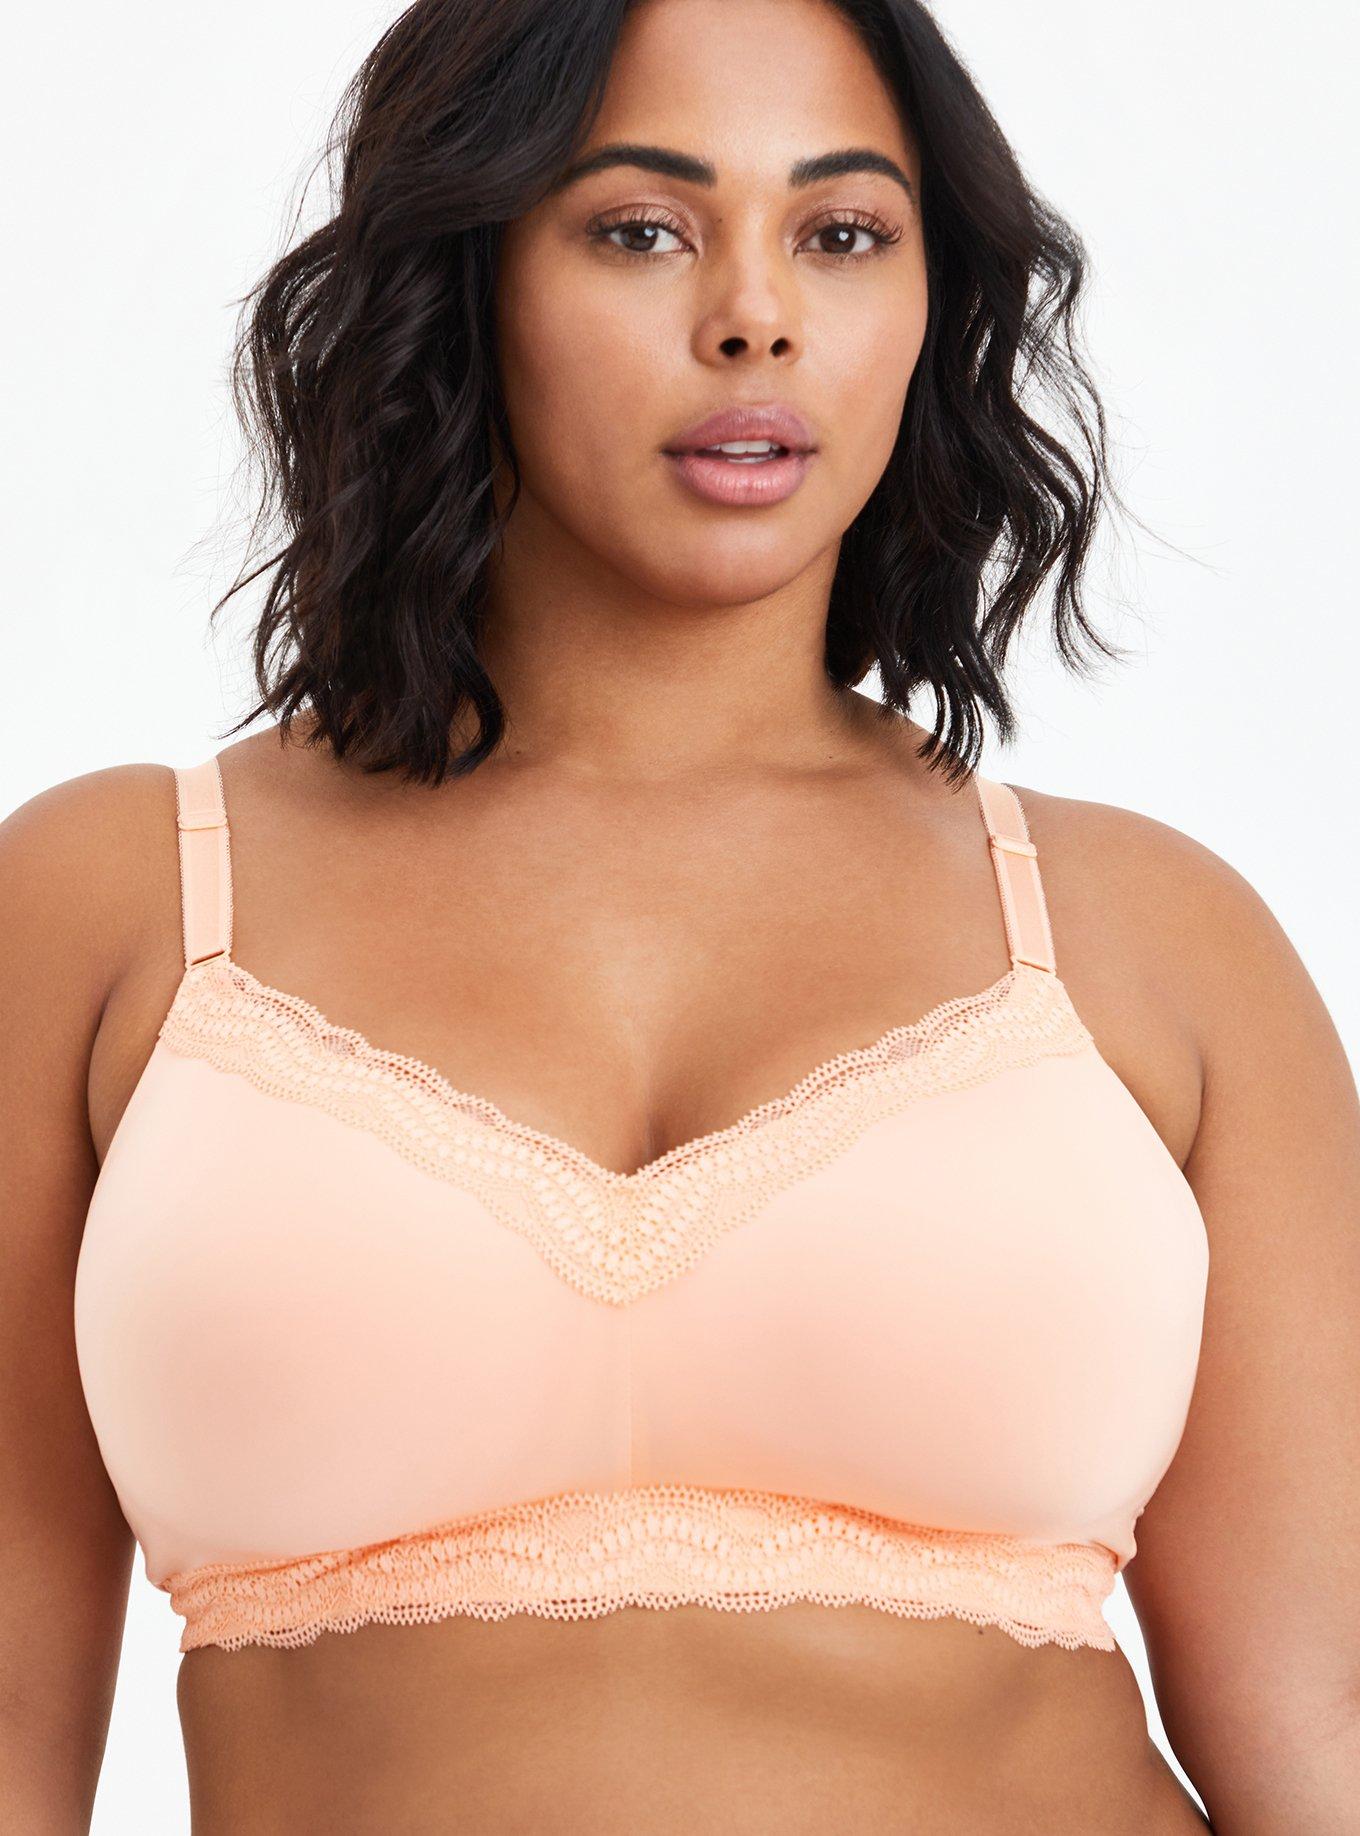 Collection Dream On - Graduated cup bra and brazilian panty